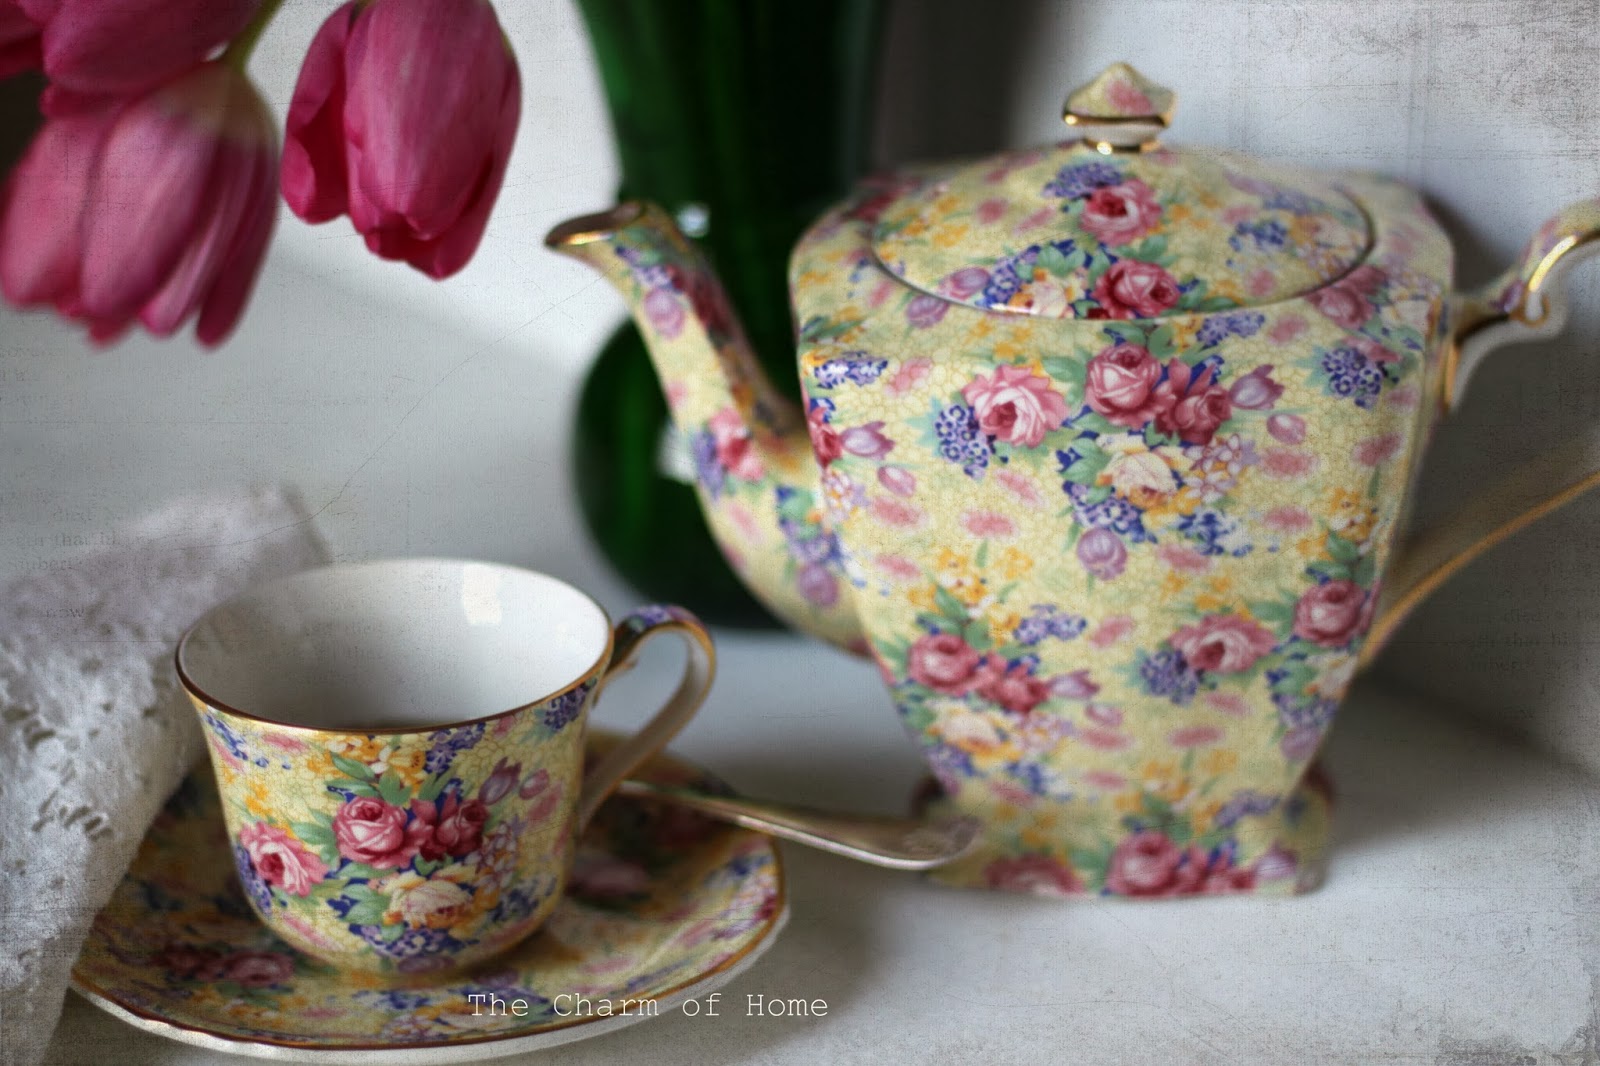 Spring Tea, The Charm of Home